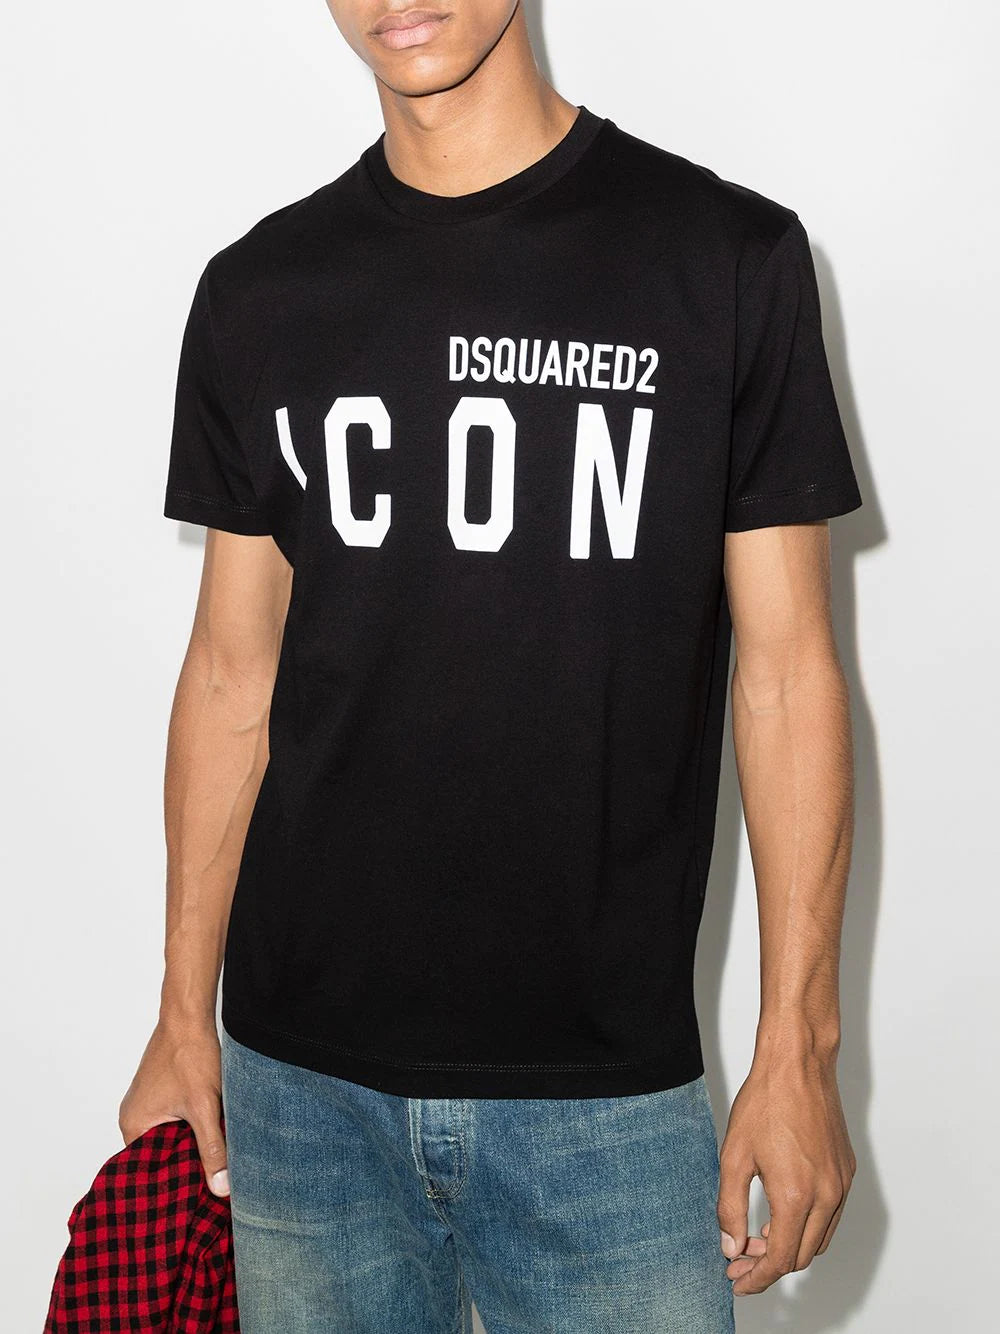 T SHIRT DSQUARED 2 ICON